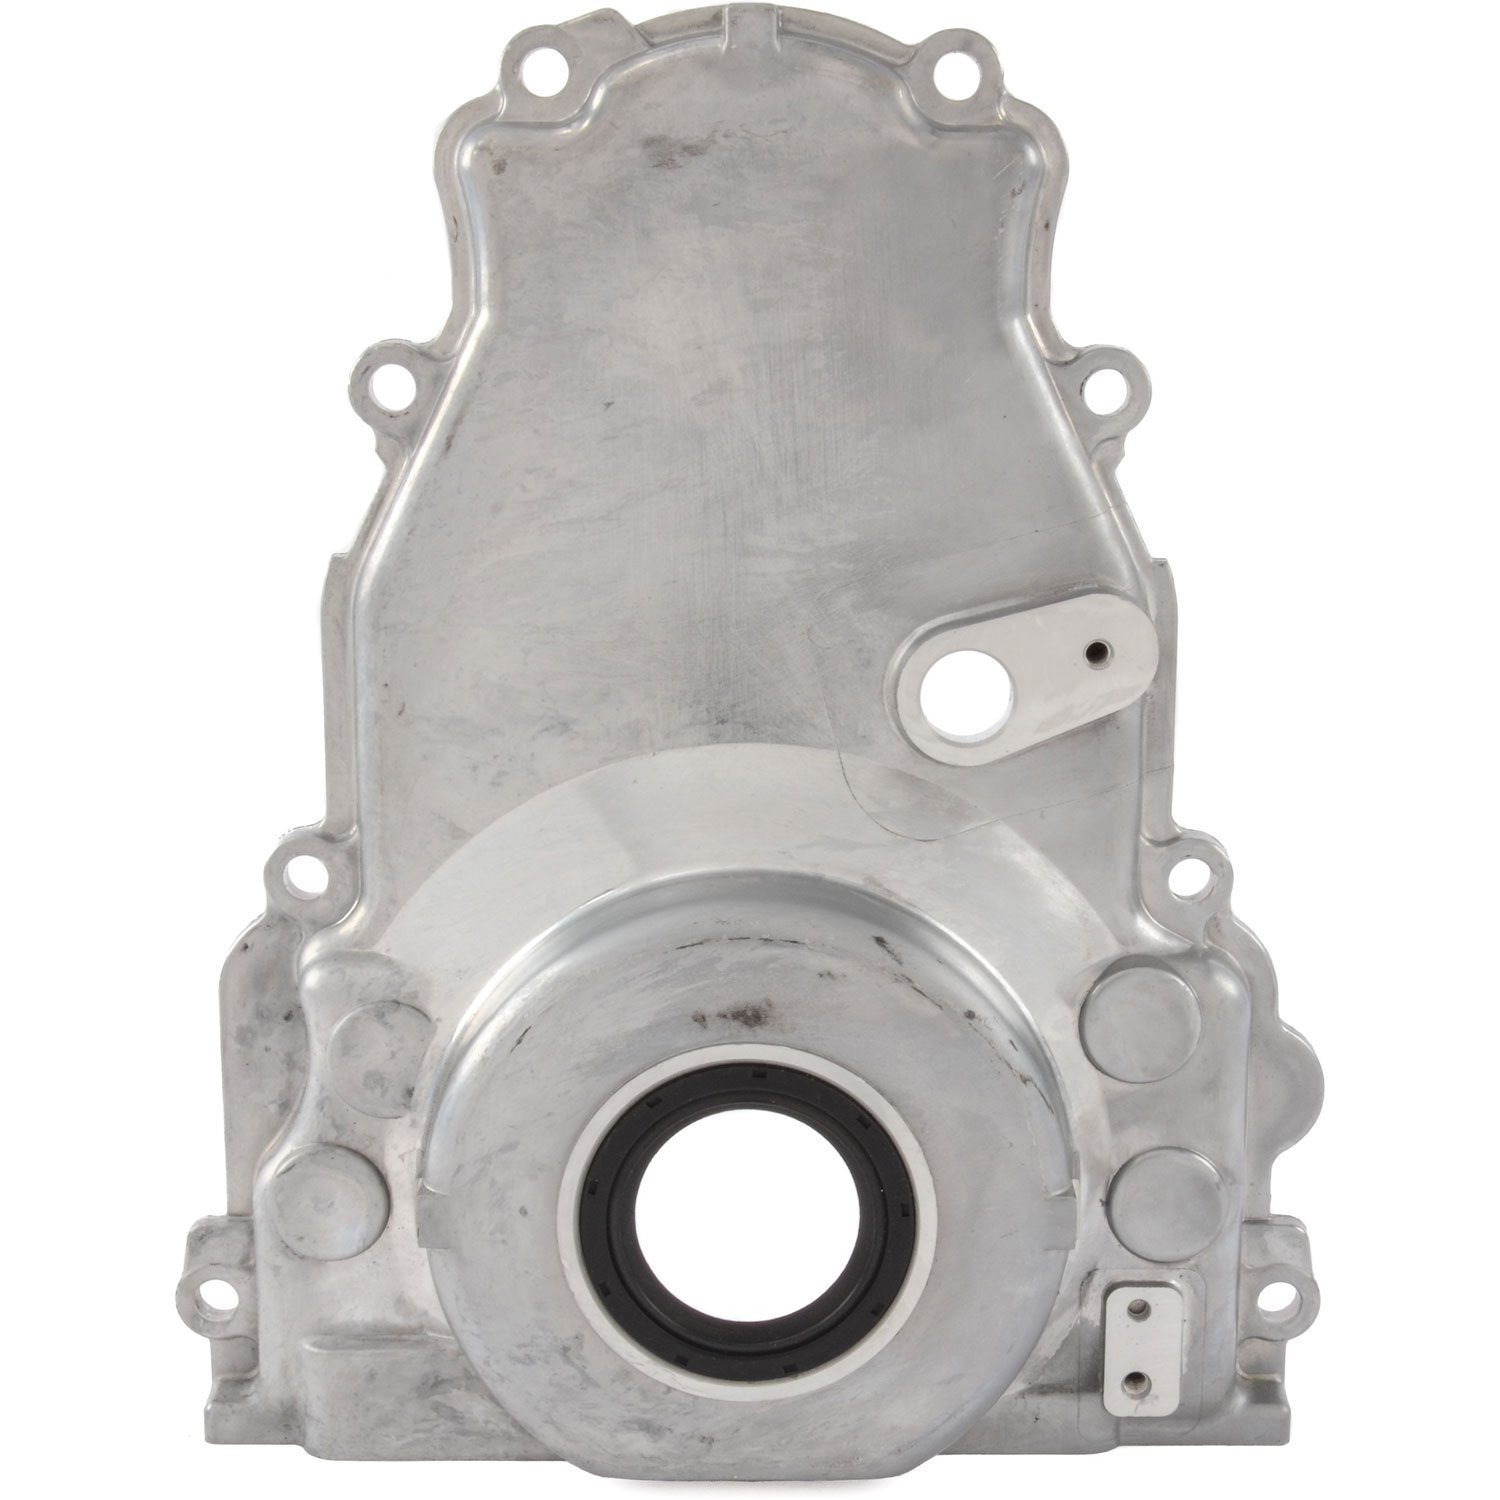 Timing Cover for GM LS2 and LS3